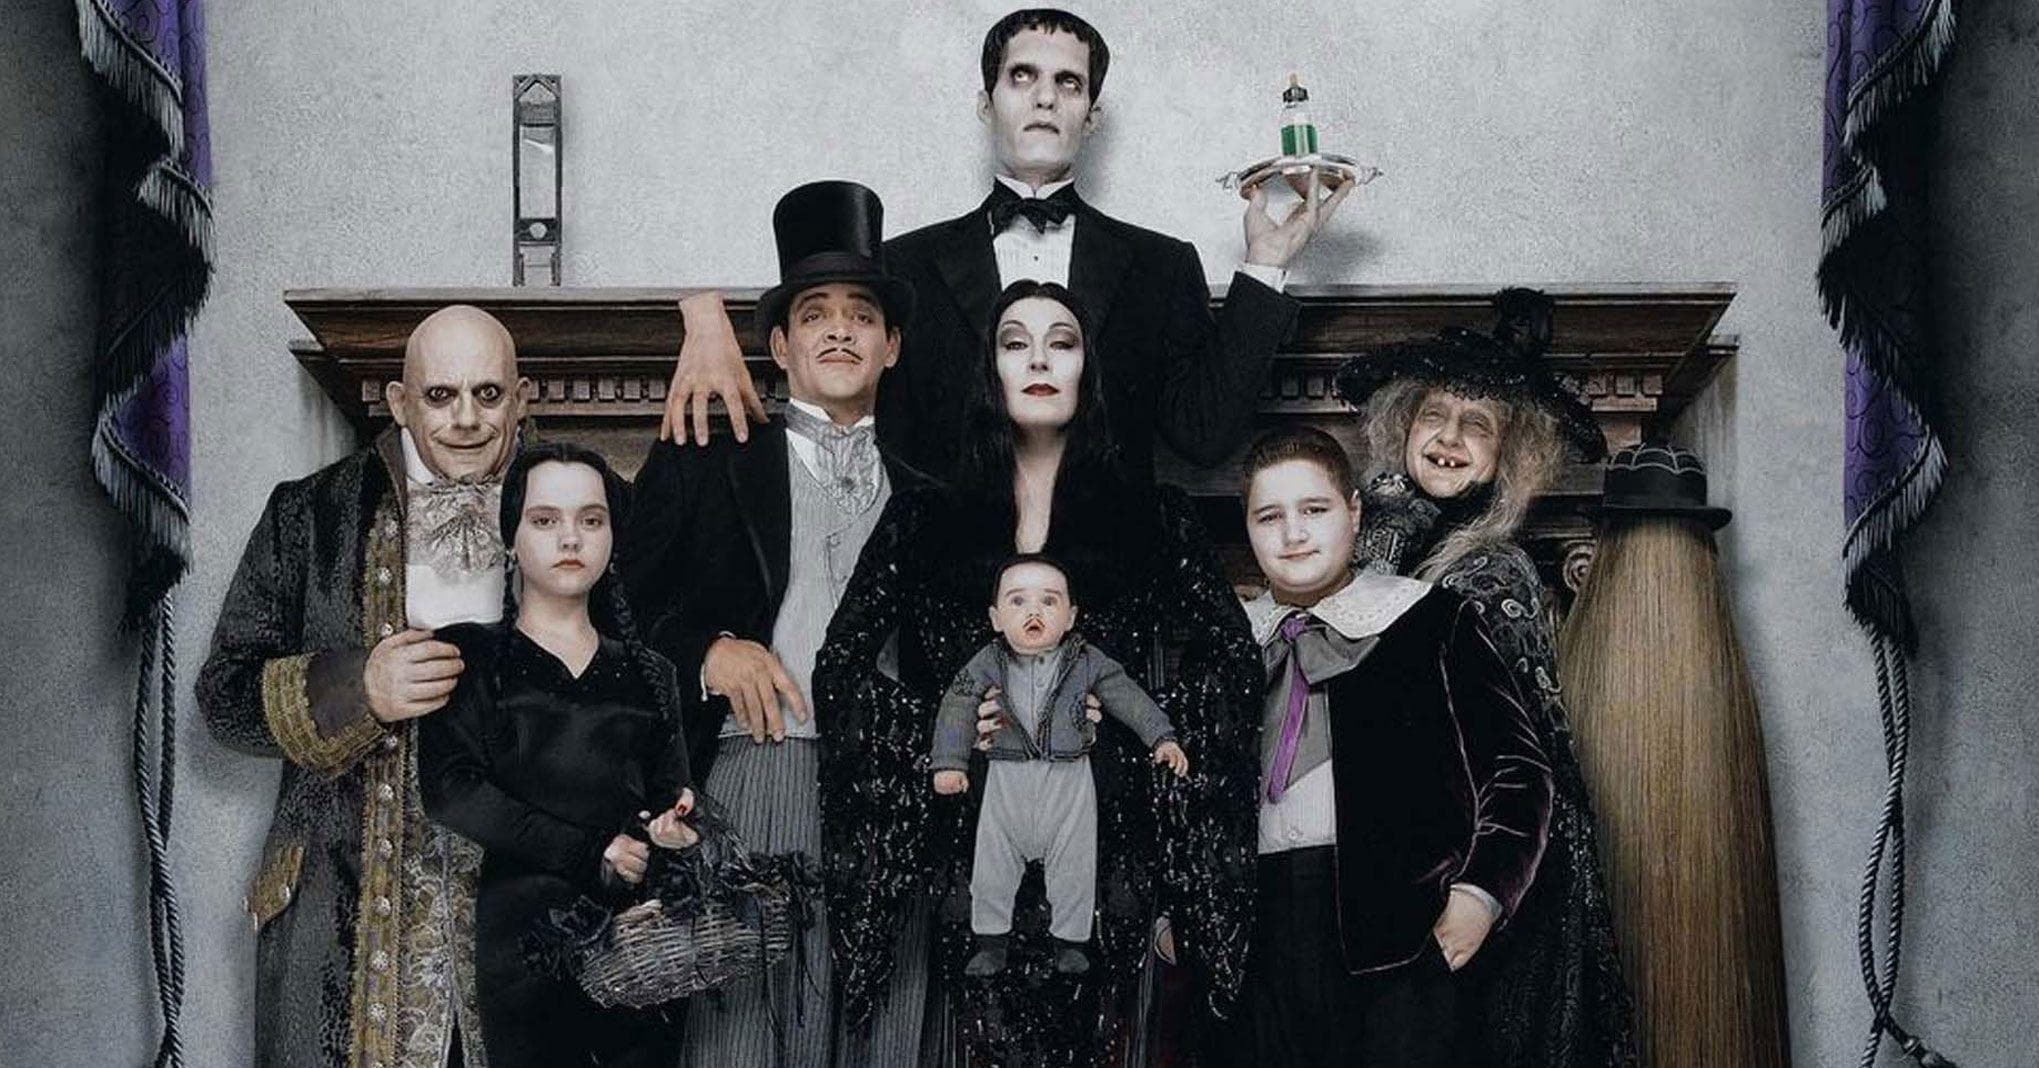 The Addams Family Characters List w/ Photos, Ranked Best to Worst